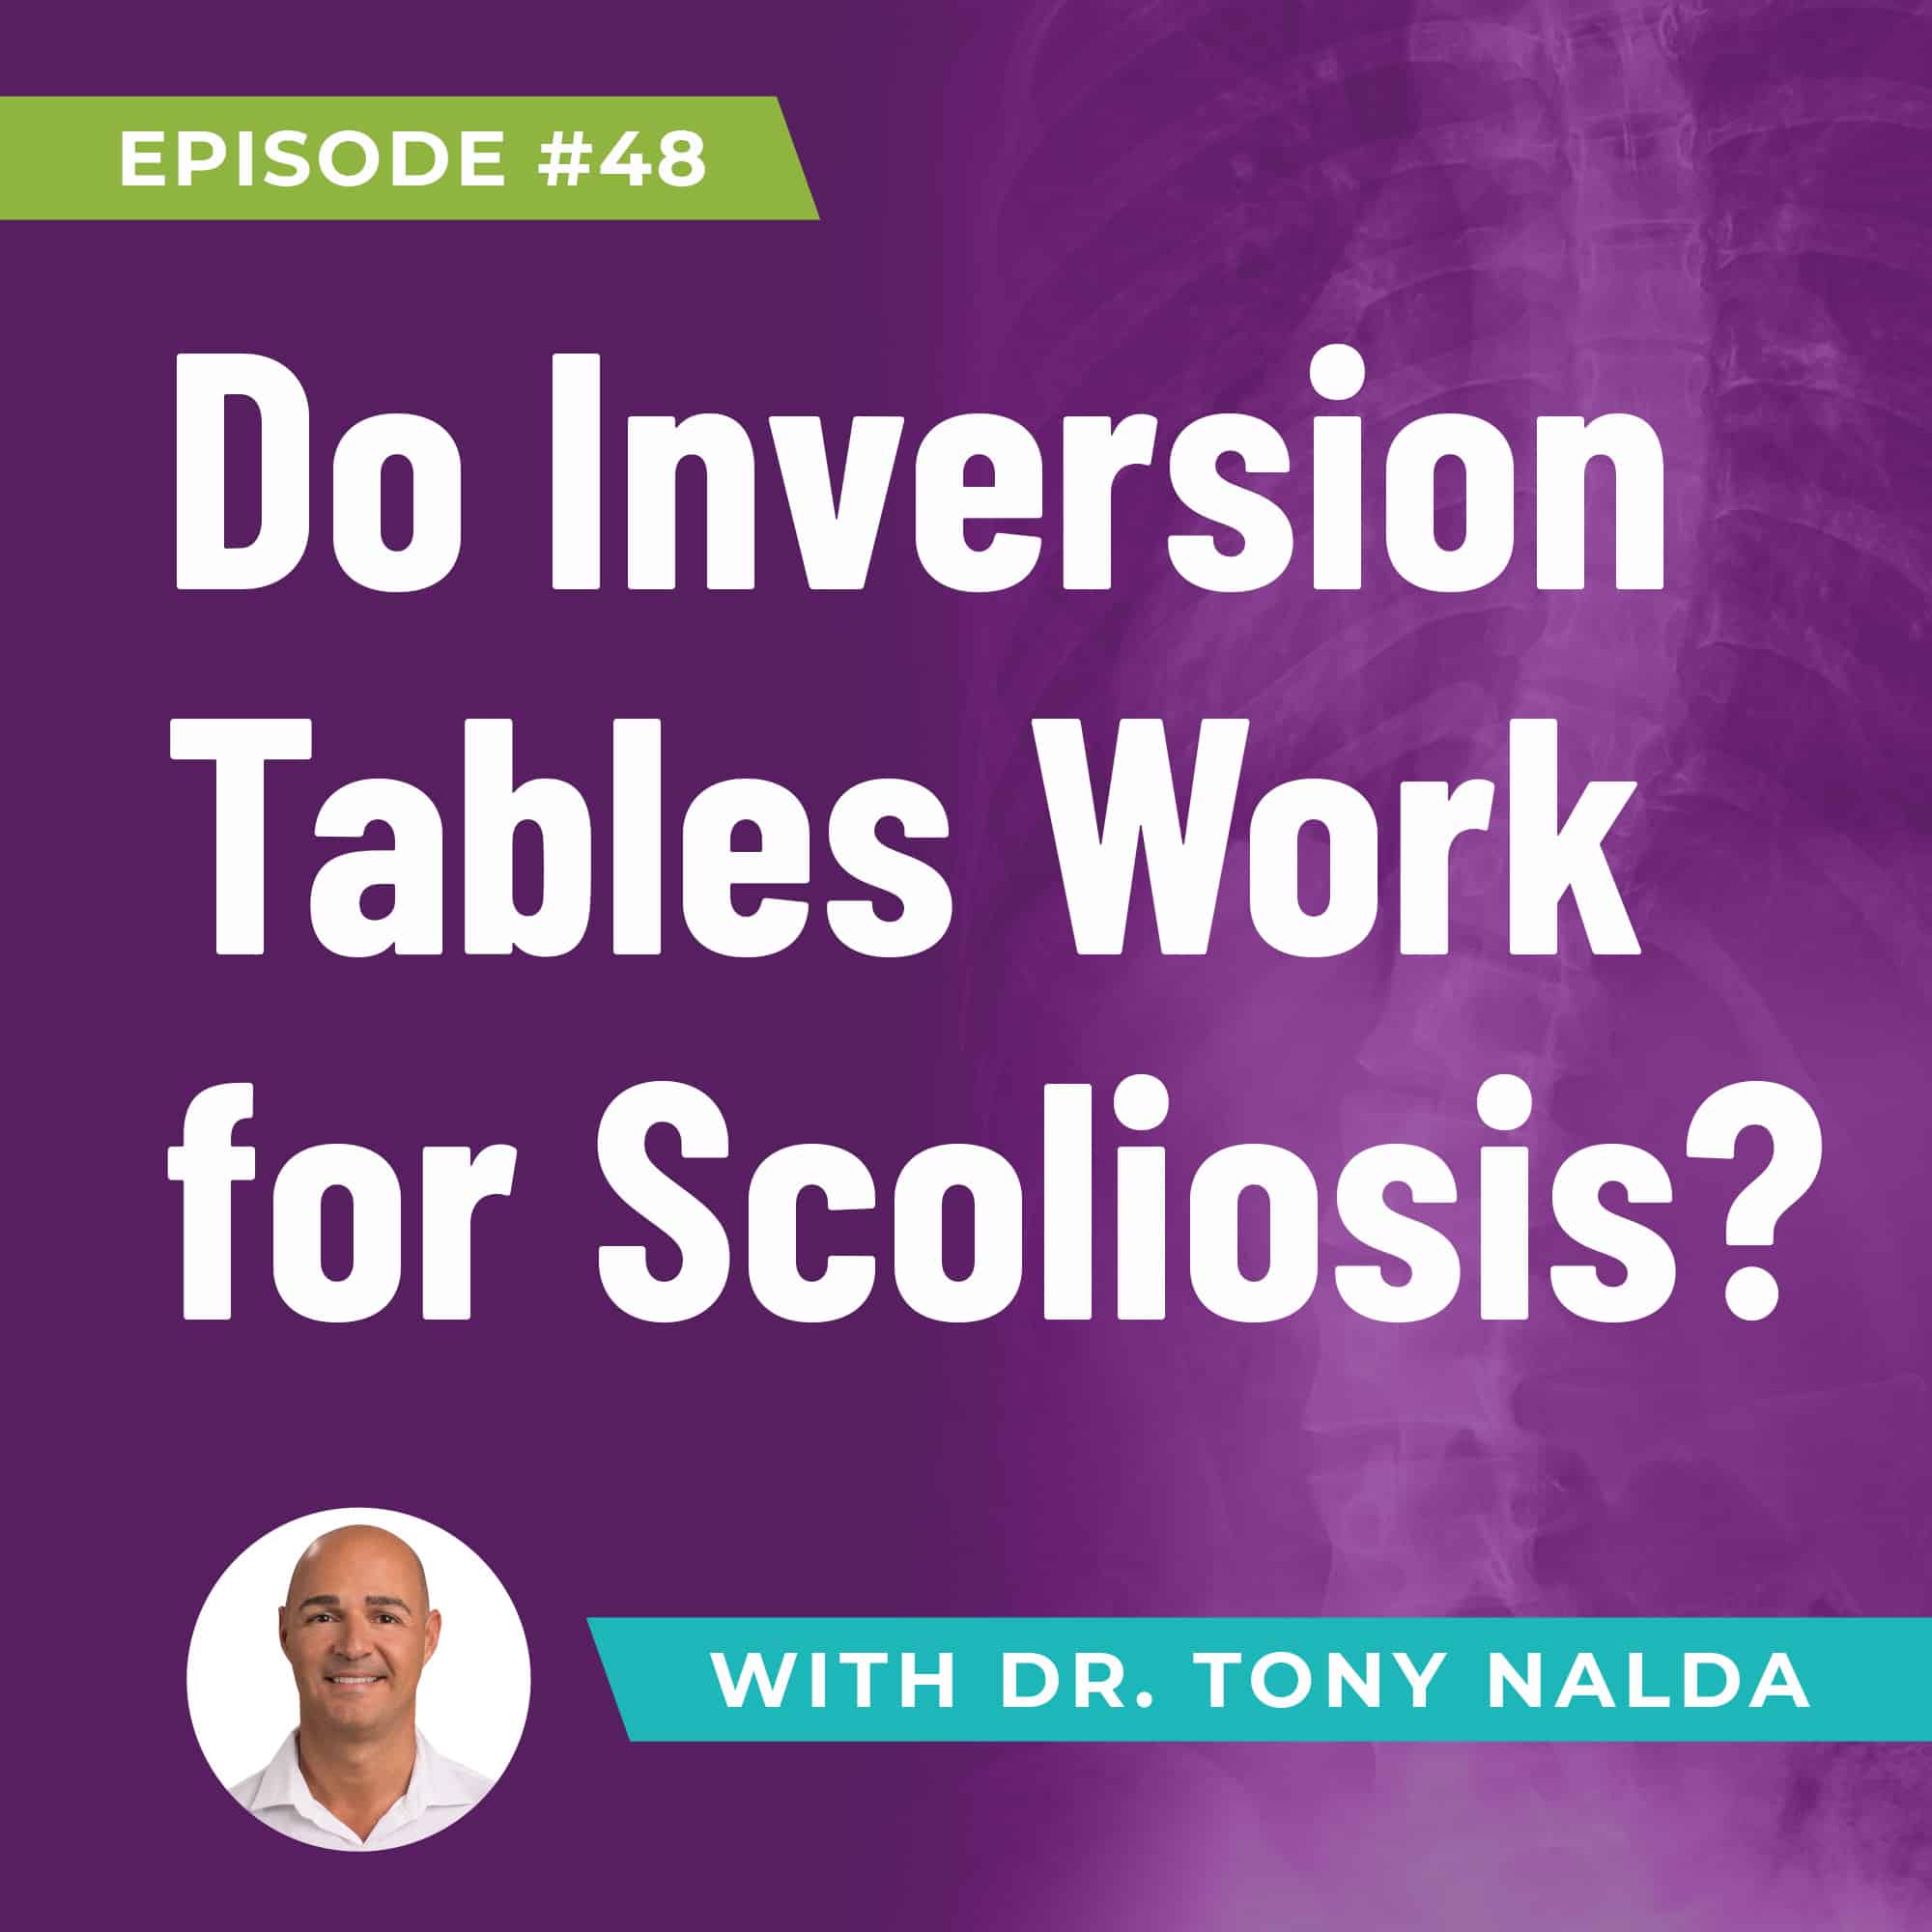 Do Inversion Tables Work for Scoliosis?